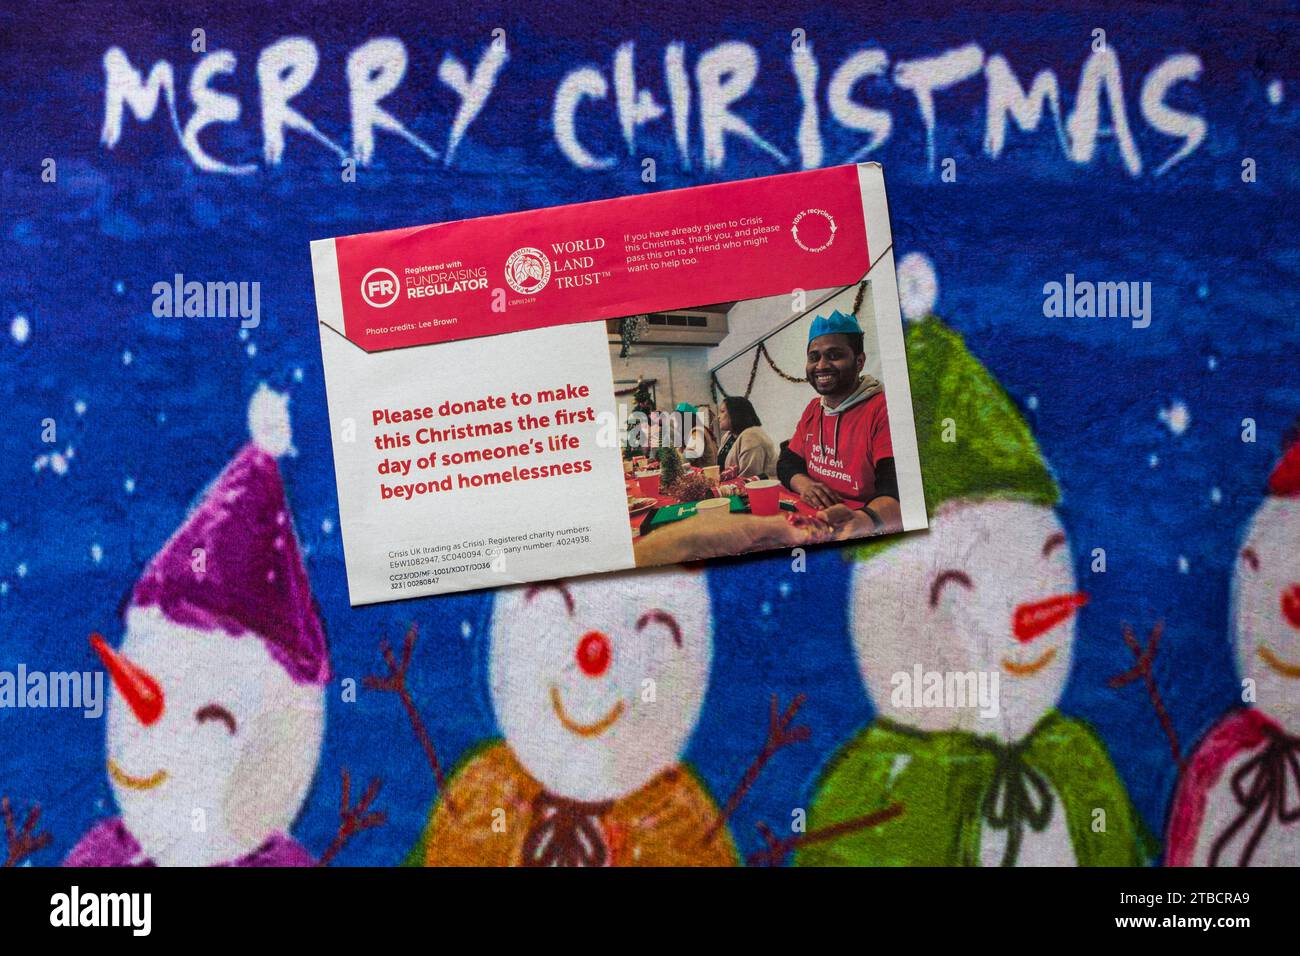 Post on Christmas mat - charity appeal from Crisis back of envelope  - Merry Christmas Stock Photo